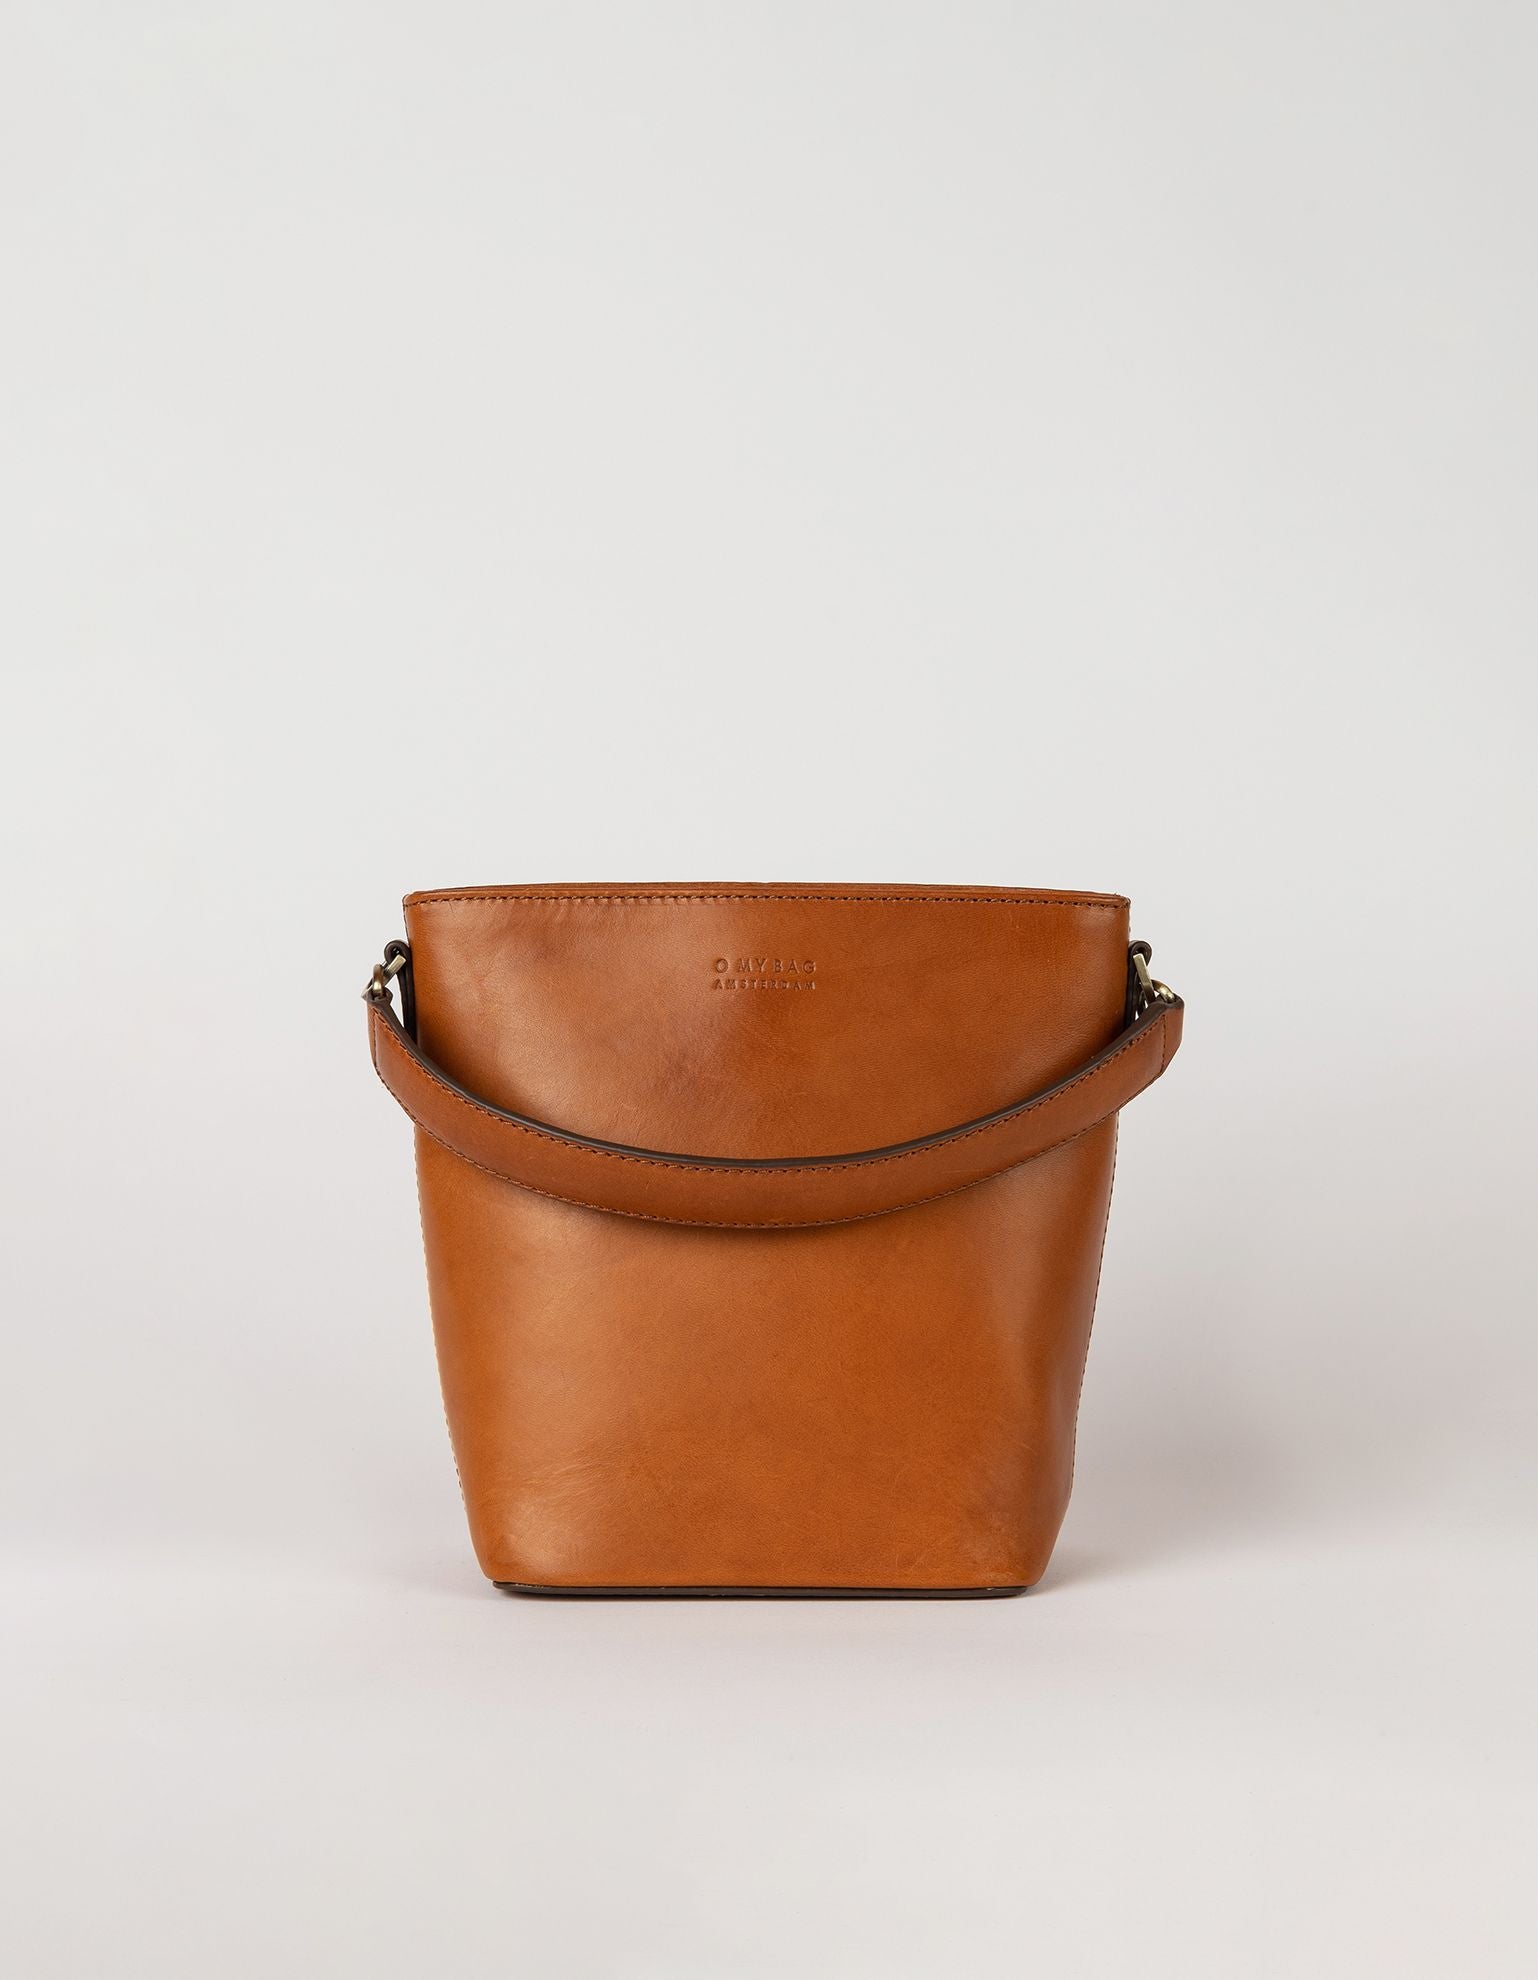 Small Cognac Bucket bag. Removable short strap. Front product image